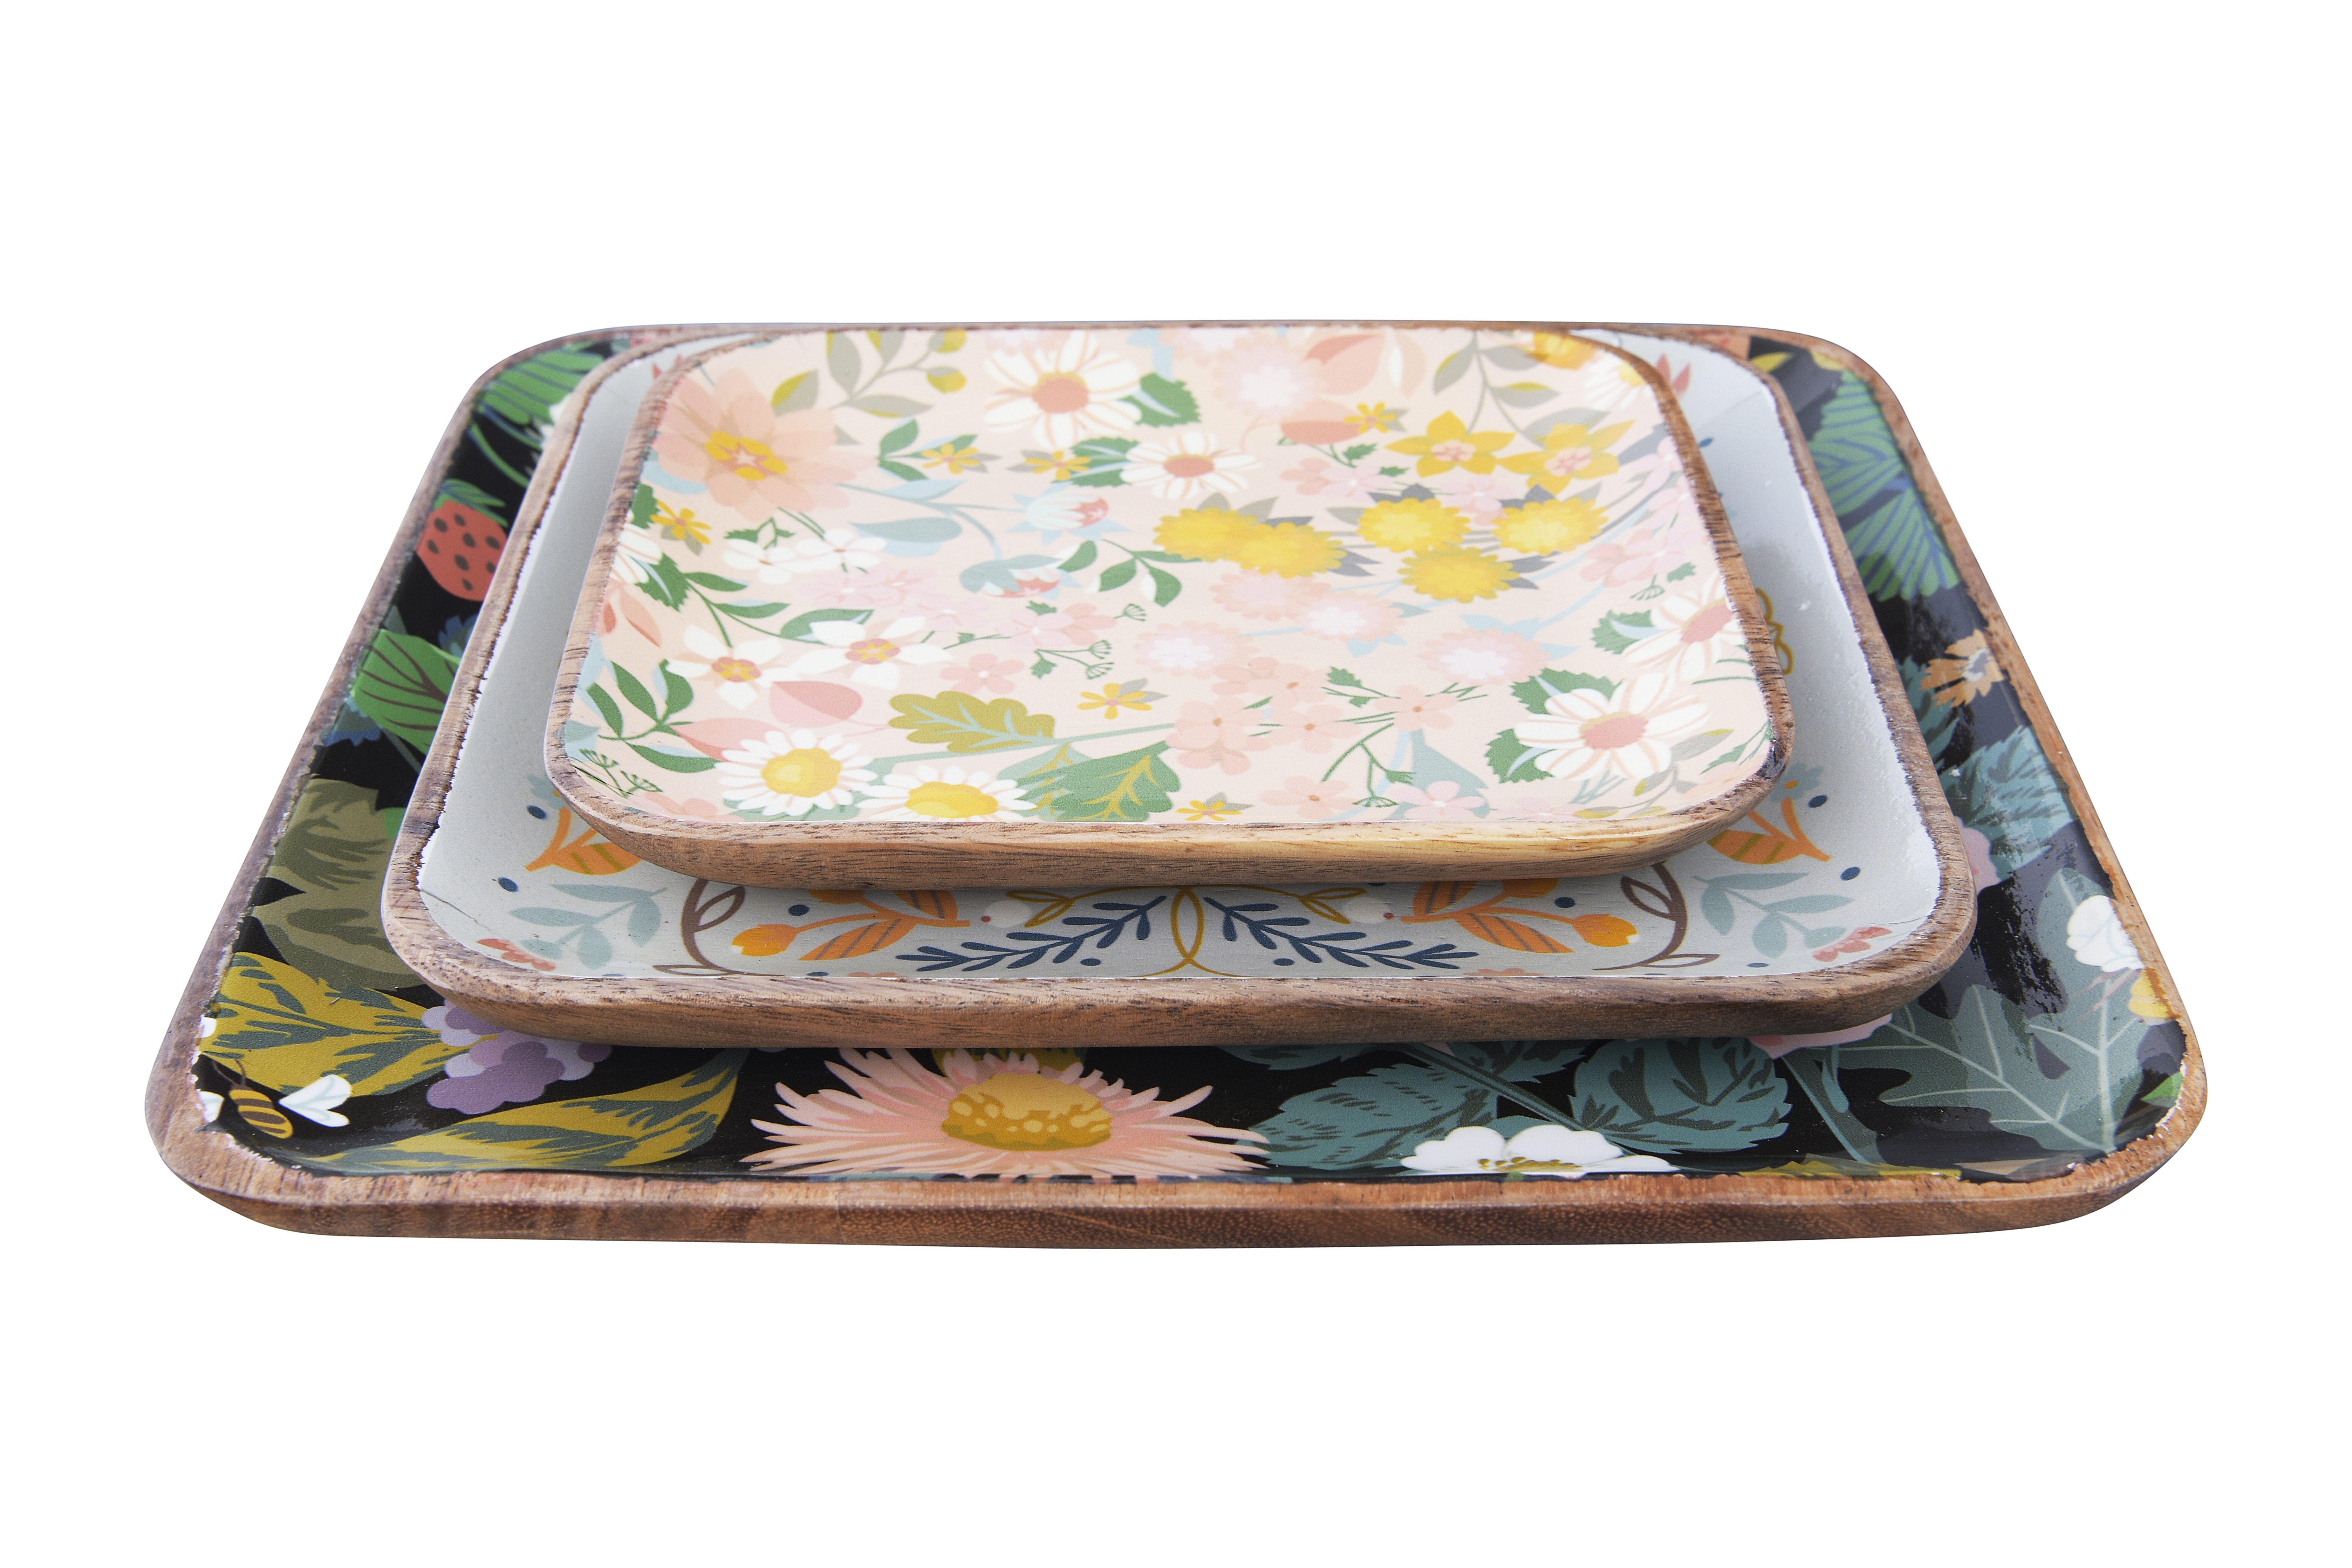 Square Enameled Acacia Wood Trays with Floral & Bee Patterns (Set of 3 Sizes/Patterns) - Nomad Home